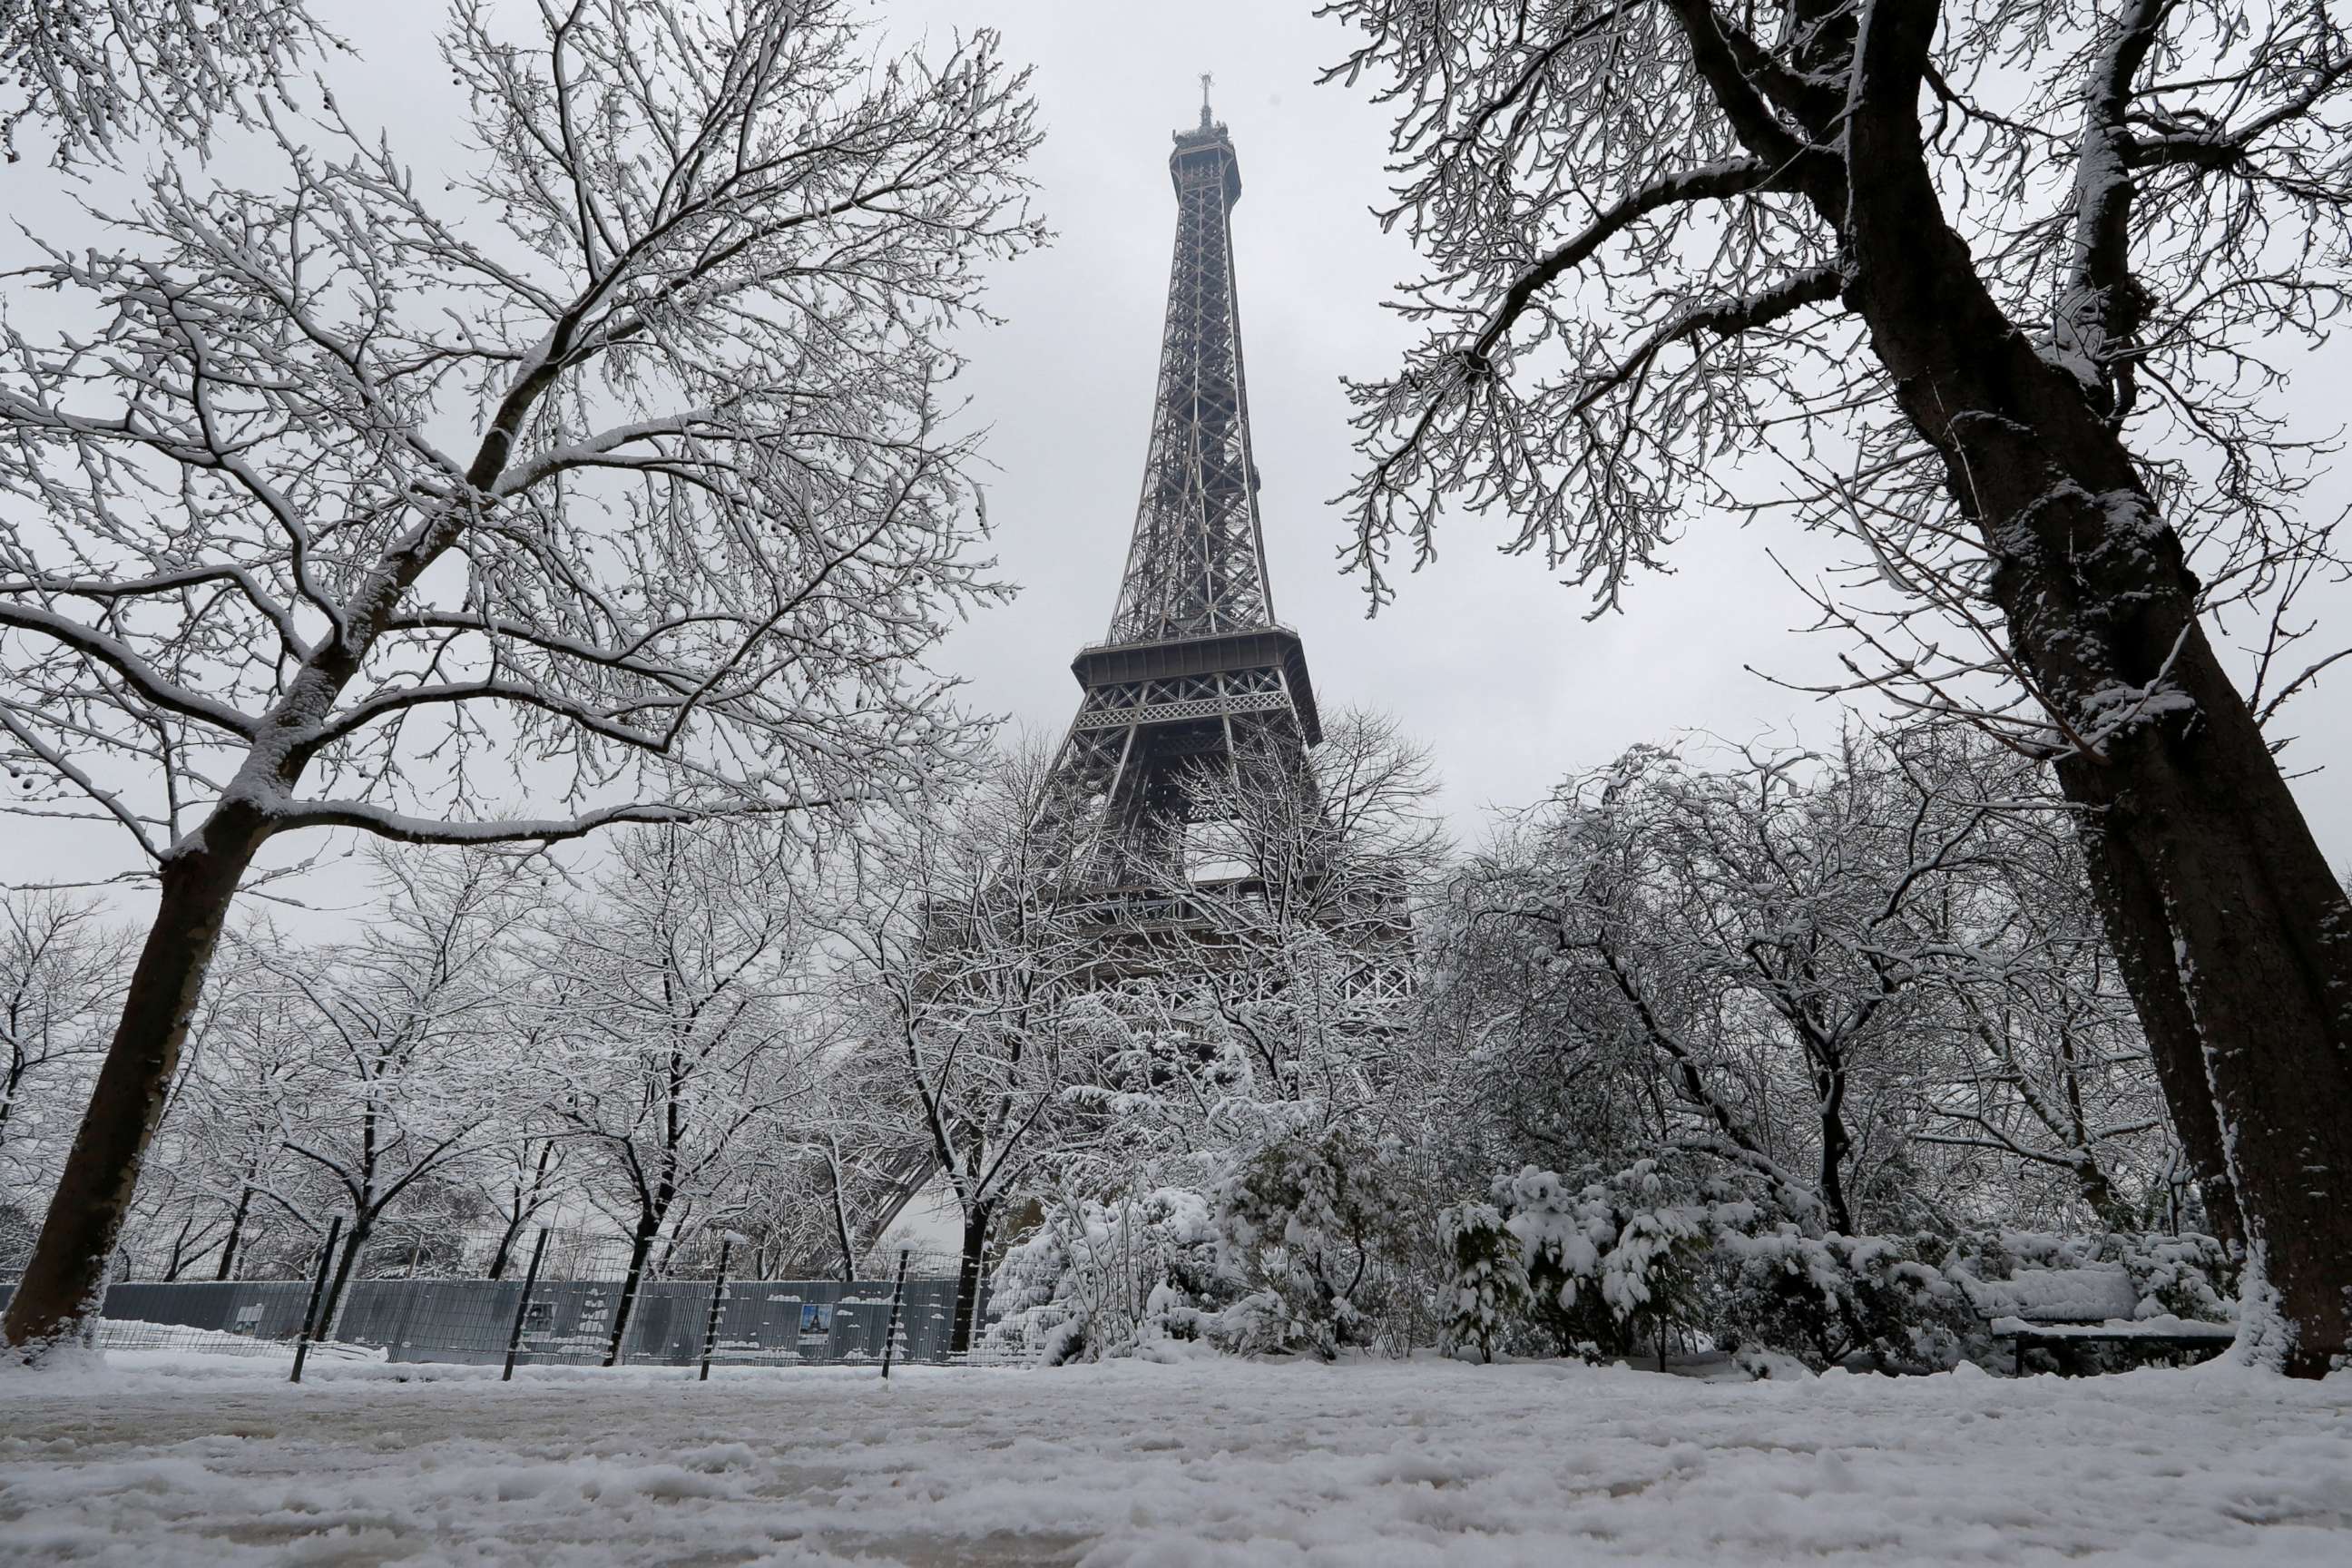 PHOTO: Snow-covered trees are seen near the Eiffel Tower in Paris, as winter weather with snow and freezing temperatures arrive in France, Feb. 7, 2018. 